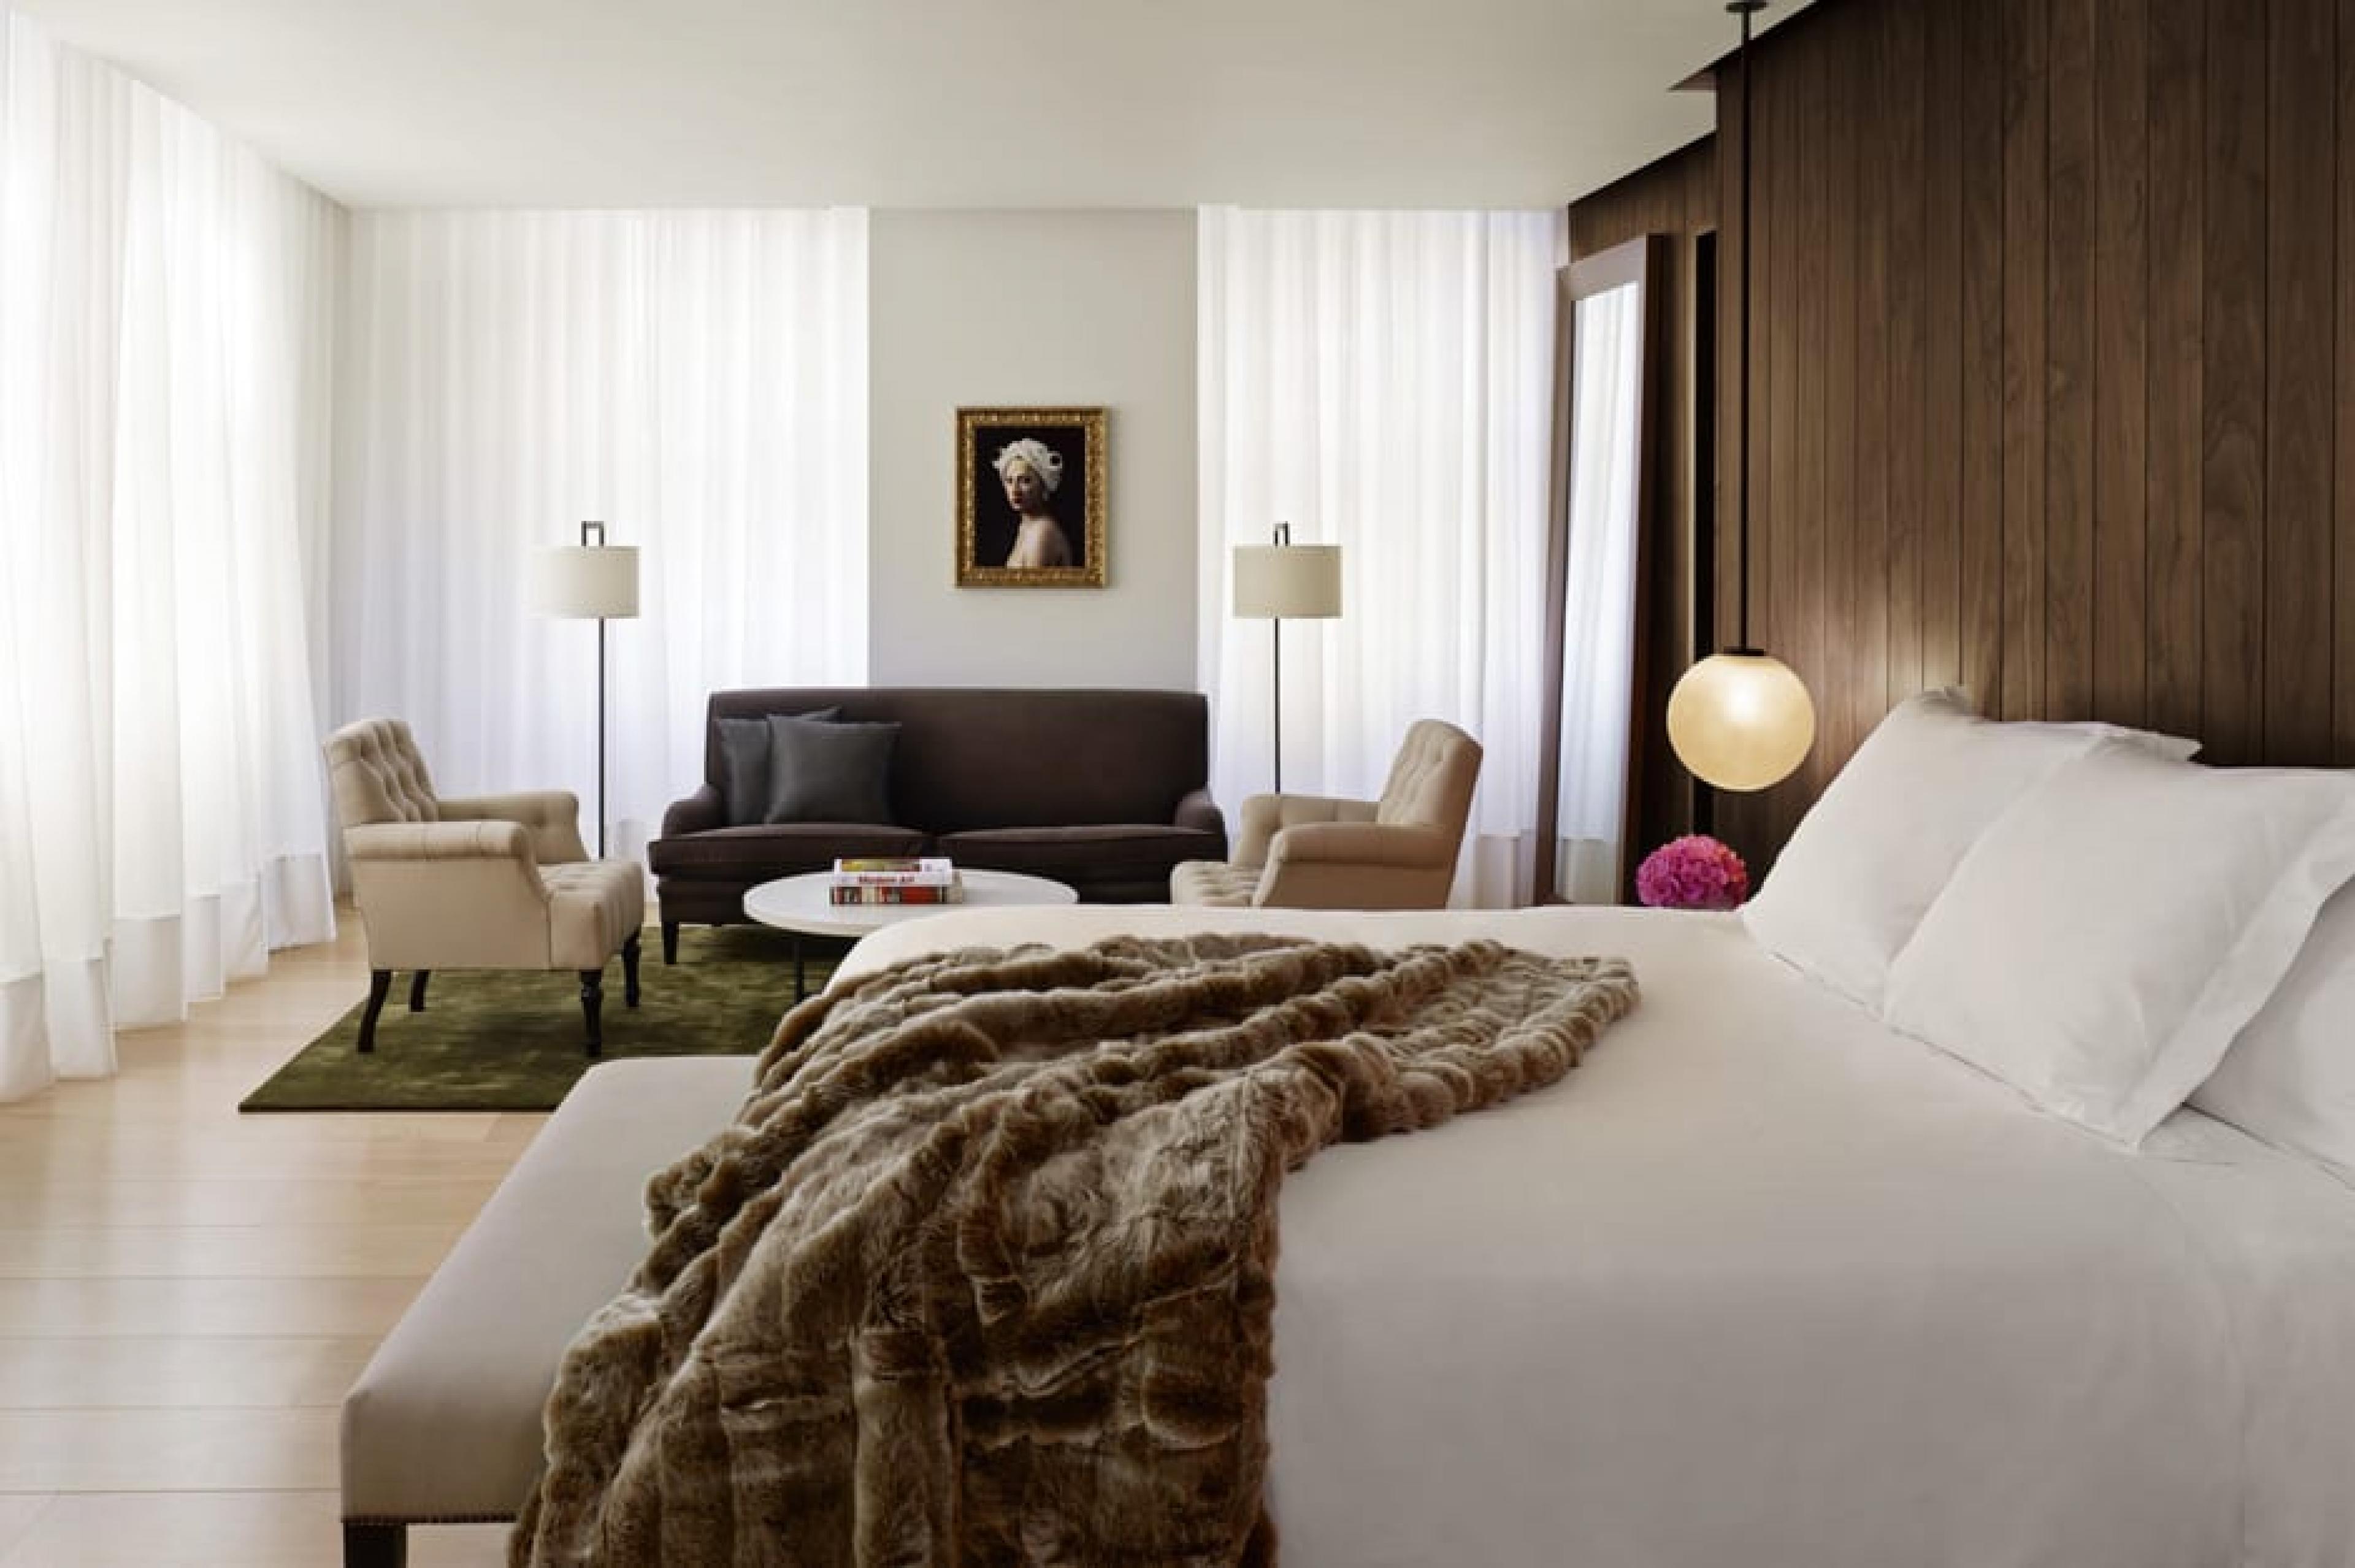 Suite at London EDITION, London, England